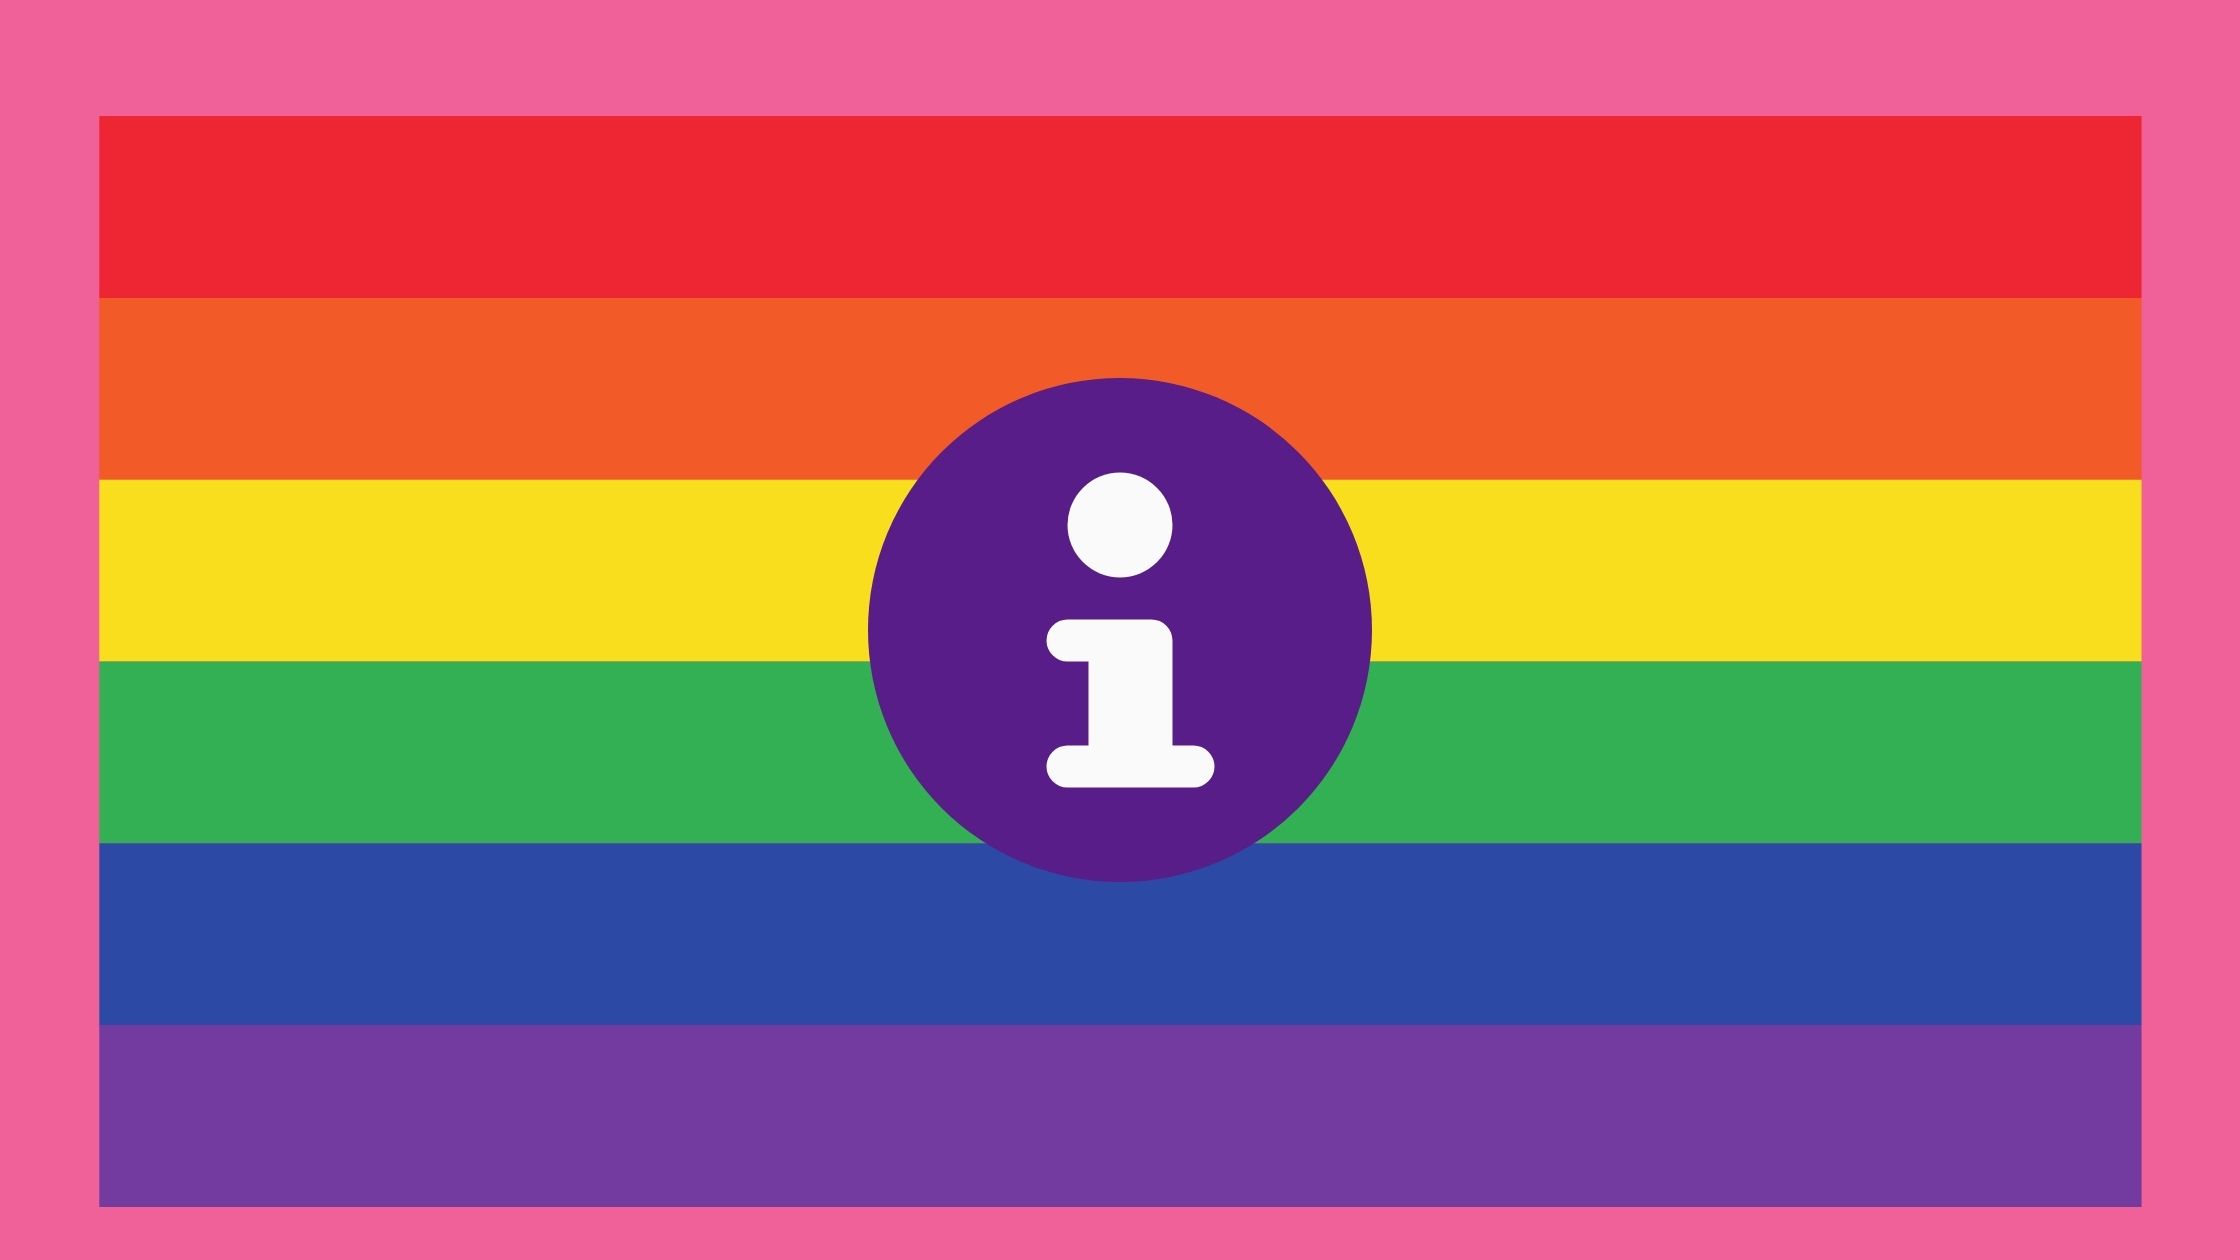 rainbow background with an i for infromation in a purple circle